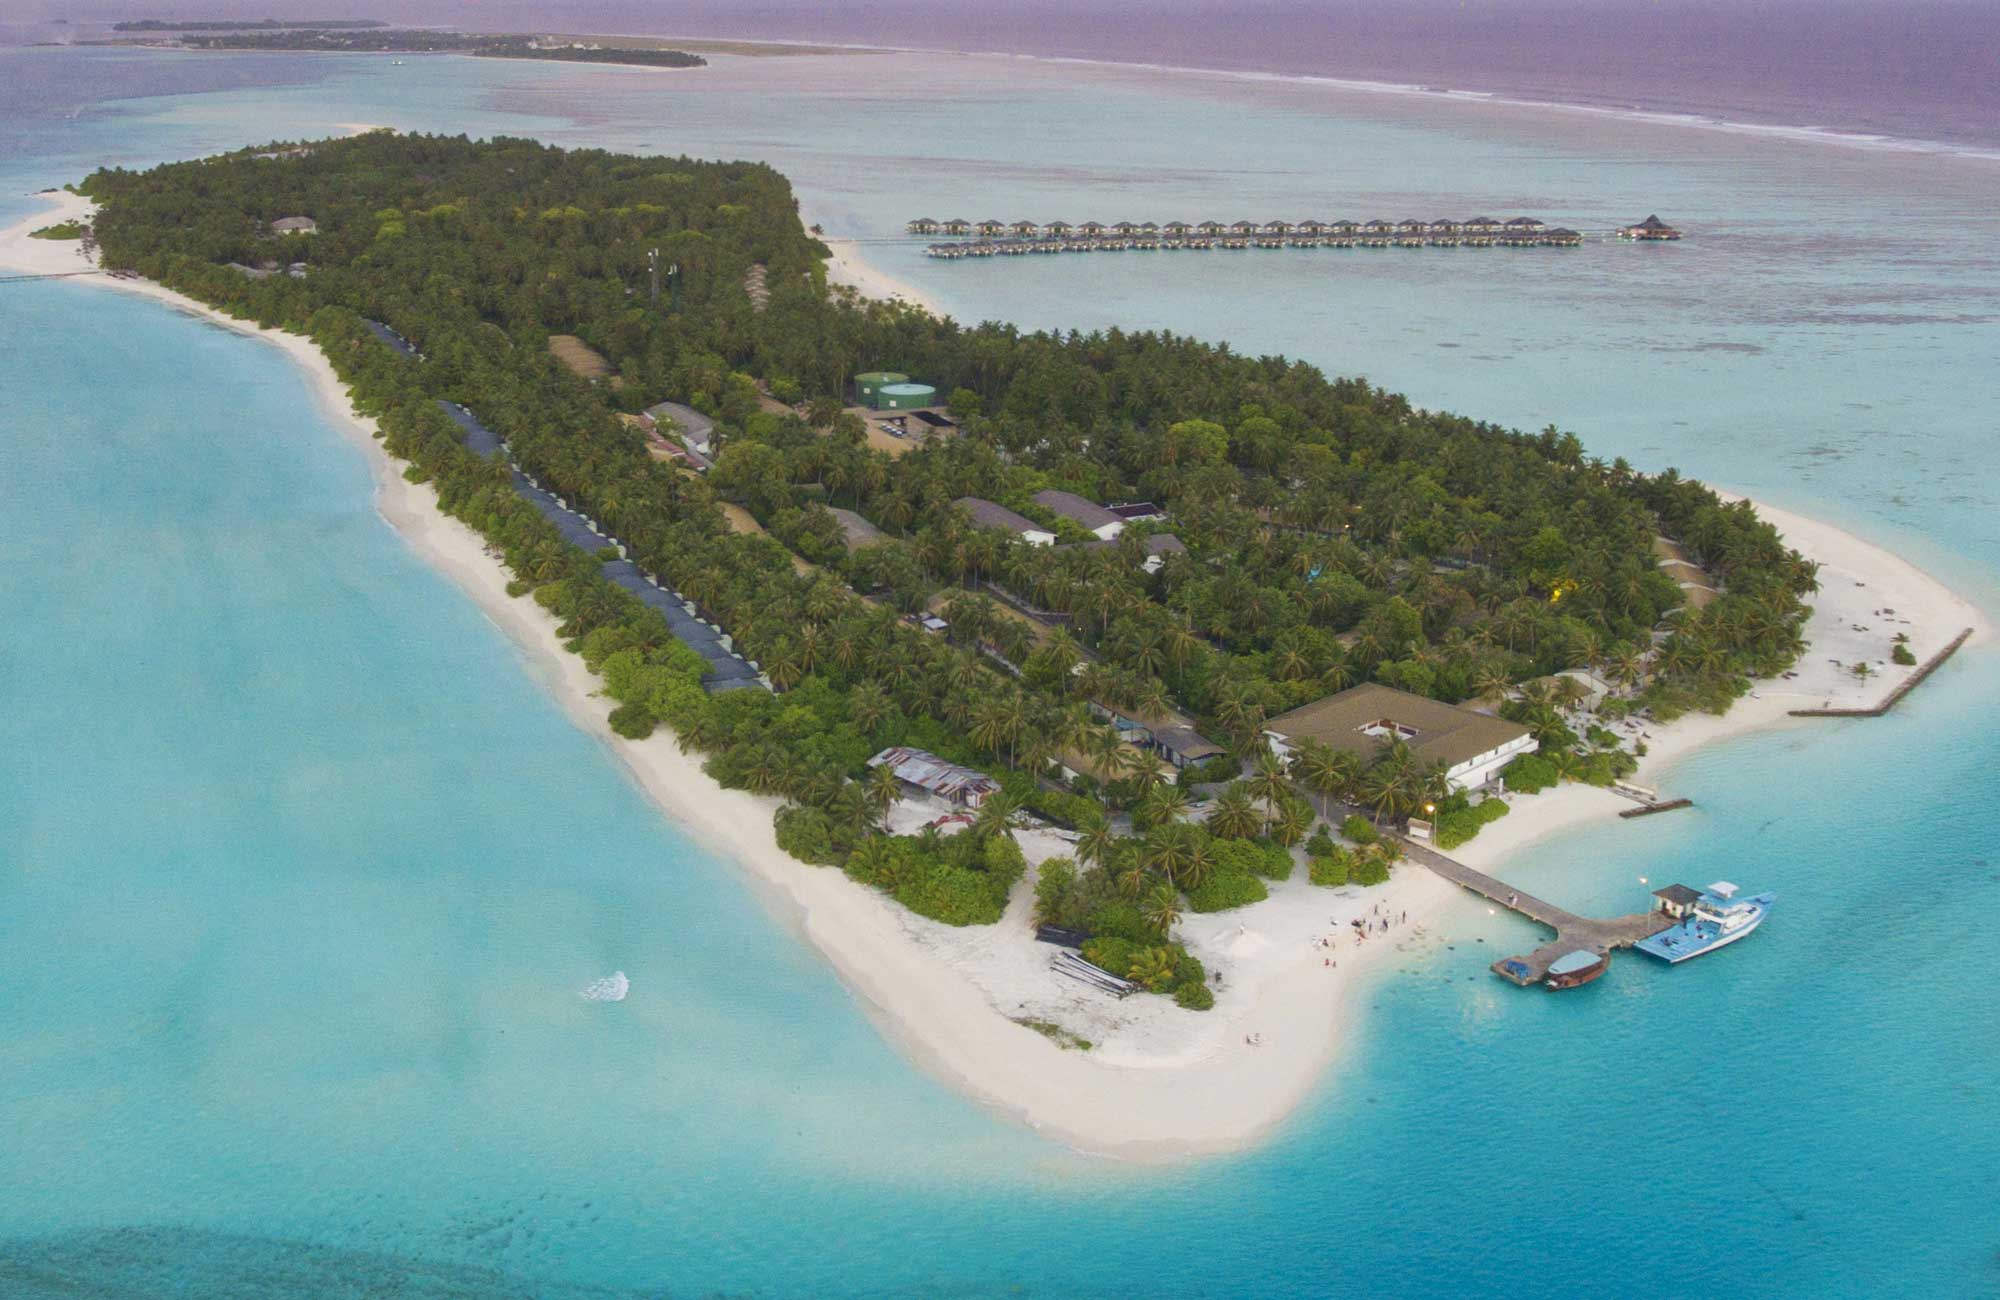 TOP 10 MALDIVIAN RESORTS WITH GREAT HOUSE REEFS